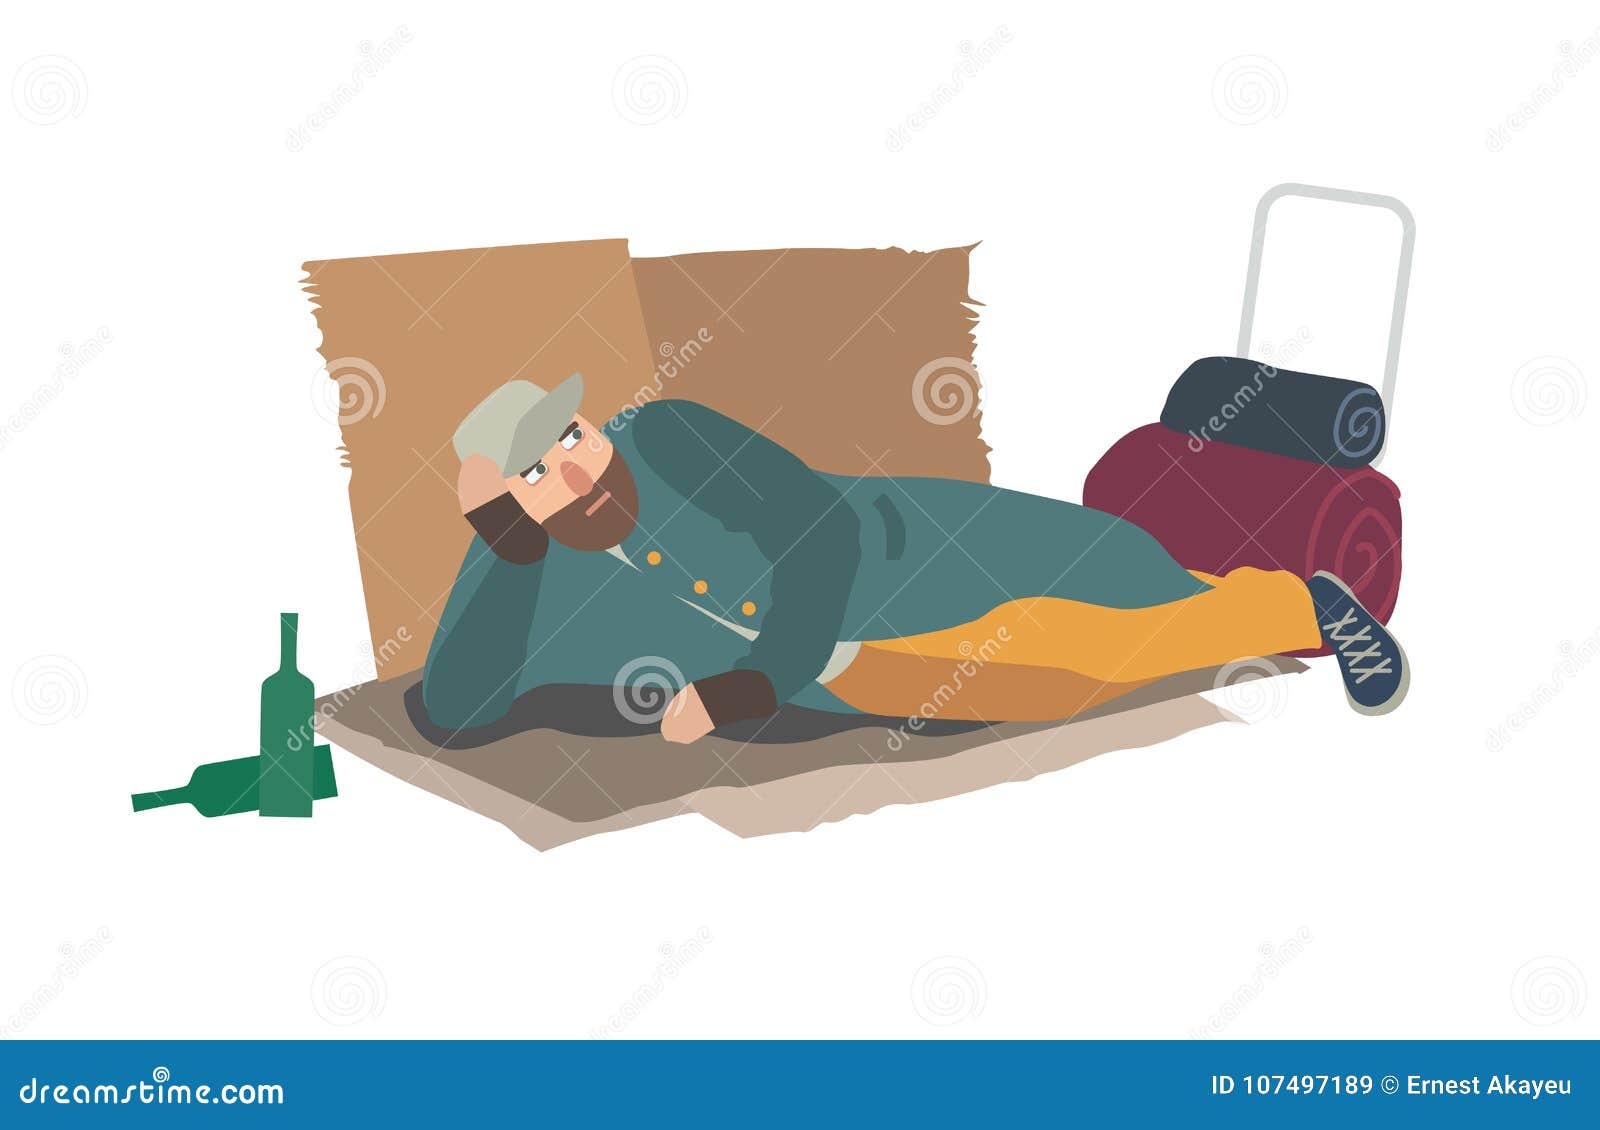 homeless man dressed in ragged clothes lying on cardboard sheets on ground. hobo, bum, tramp or vagabond. person in